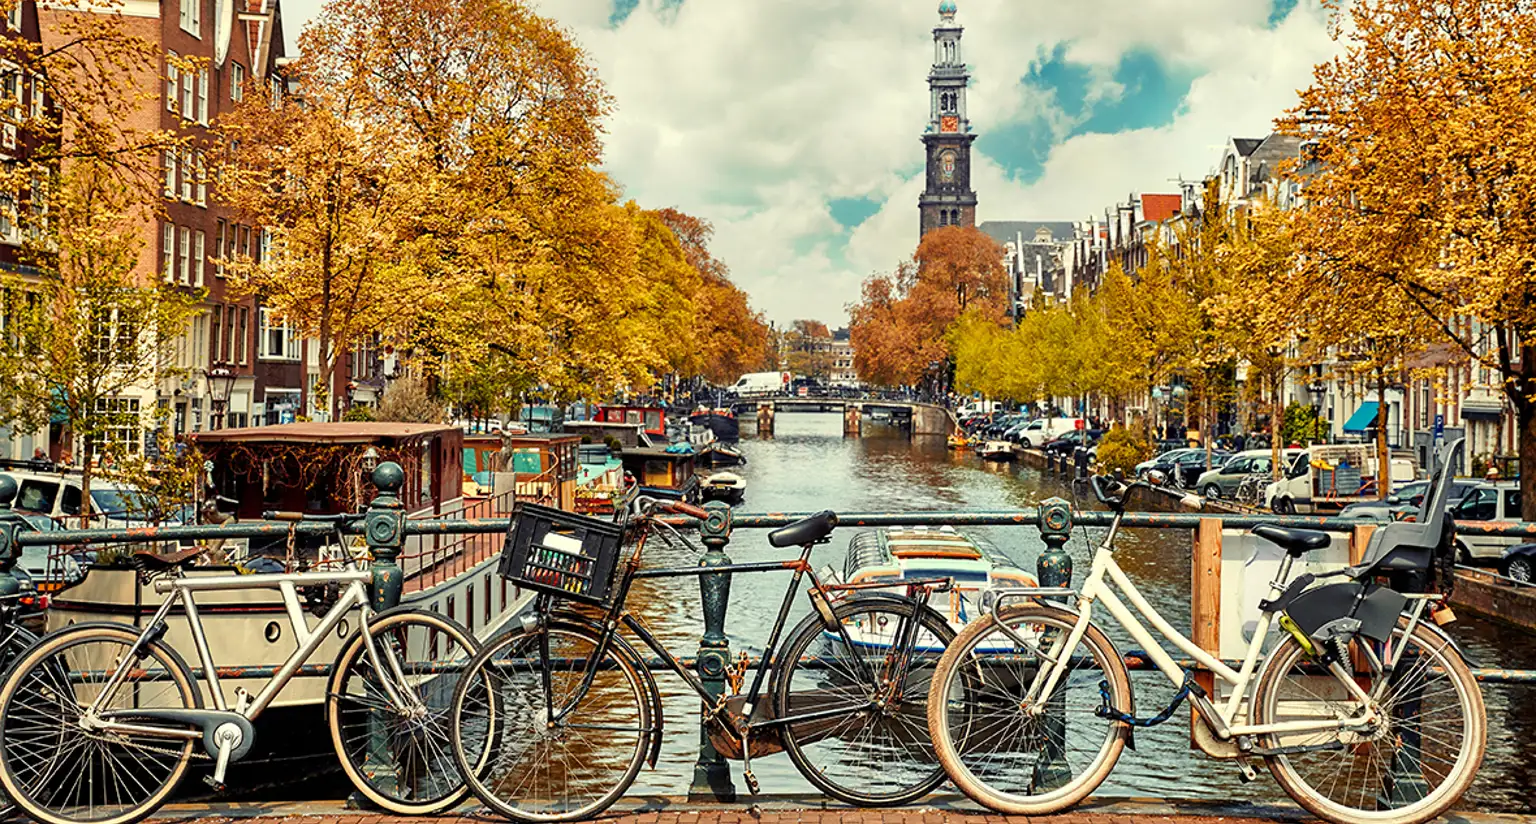 See Amsterdam by bicycle